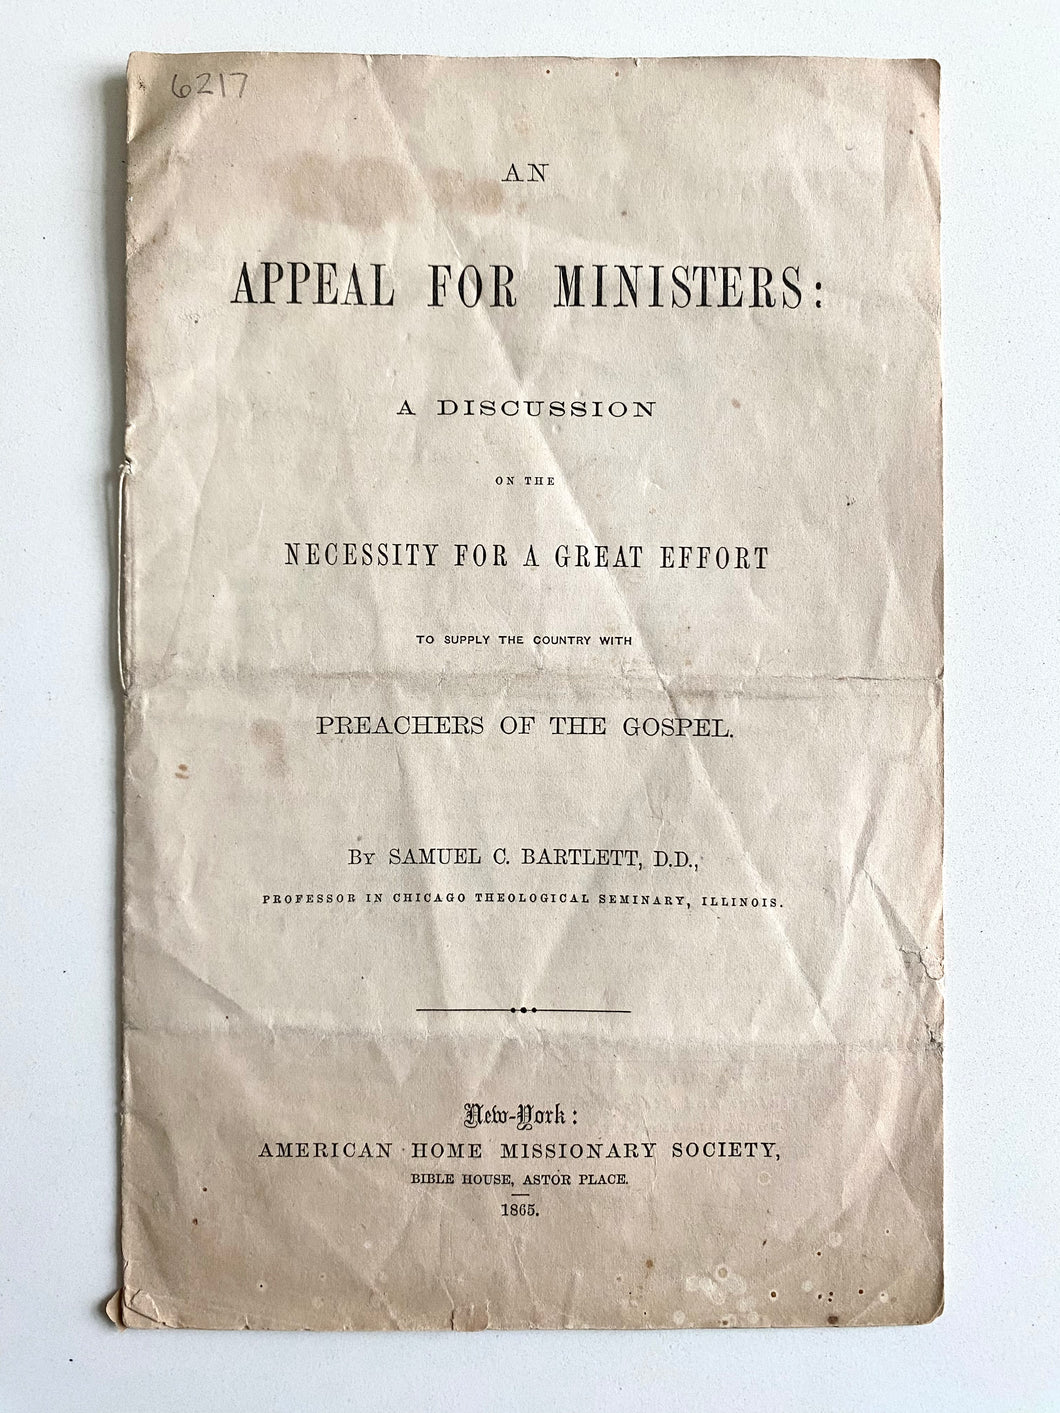 1865 CIVIL WAR. Plea for More Ministers to Meet Needs of Reconstruction & Soldier Trauma.